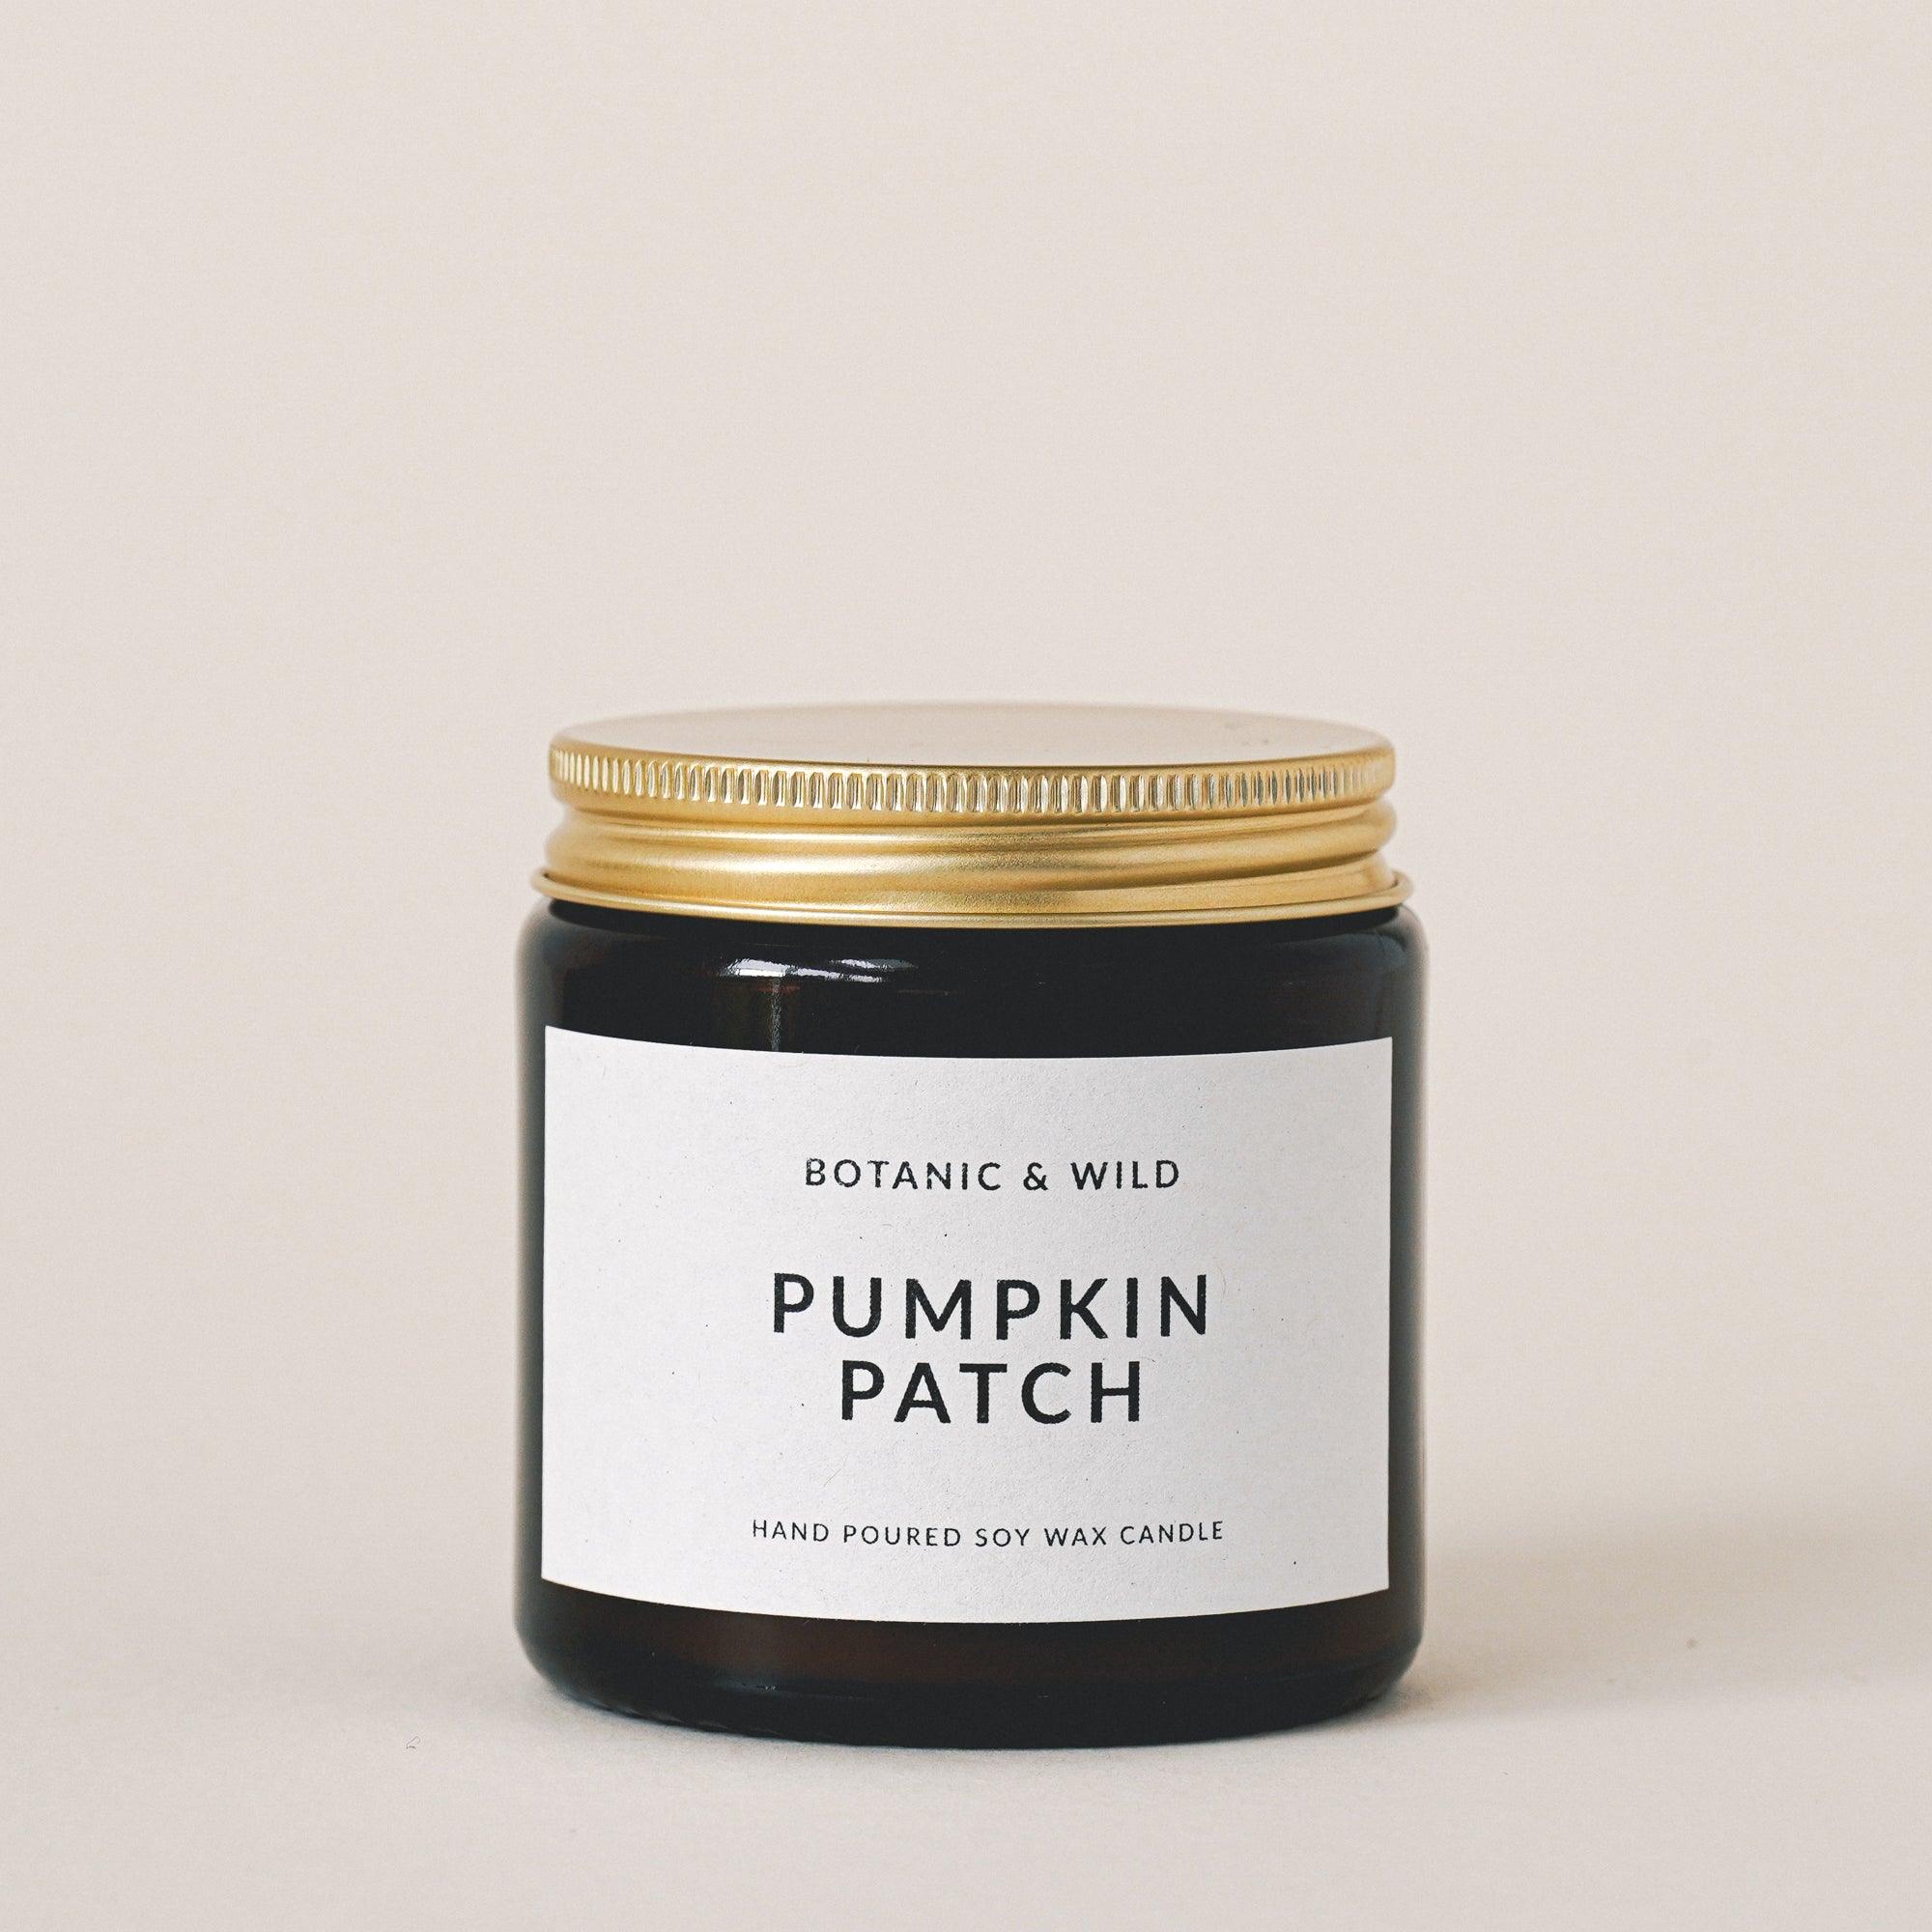 PUMPKIN PATCH Scented Soy Candles - Botanic & Wild